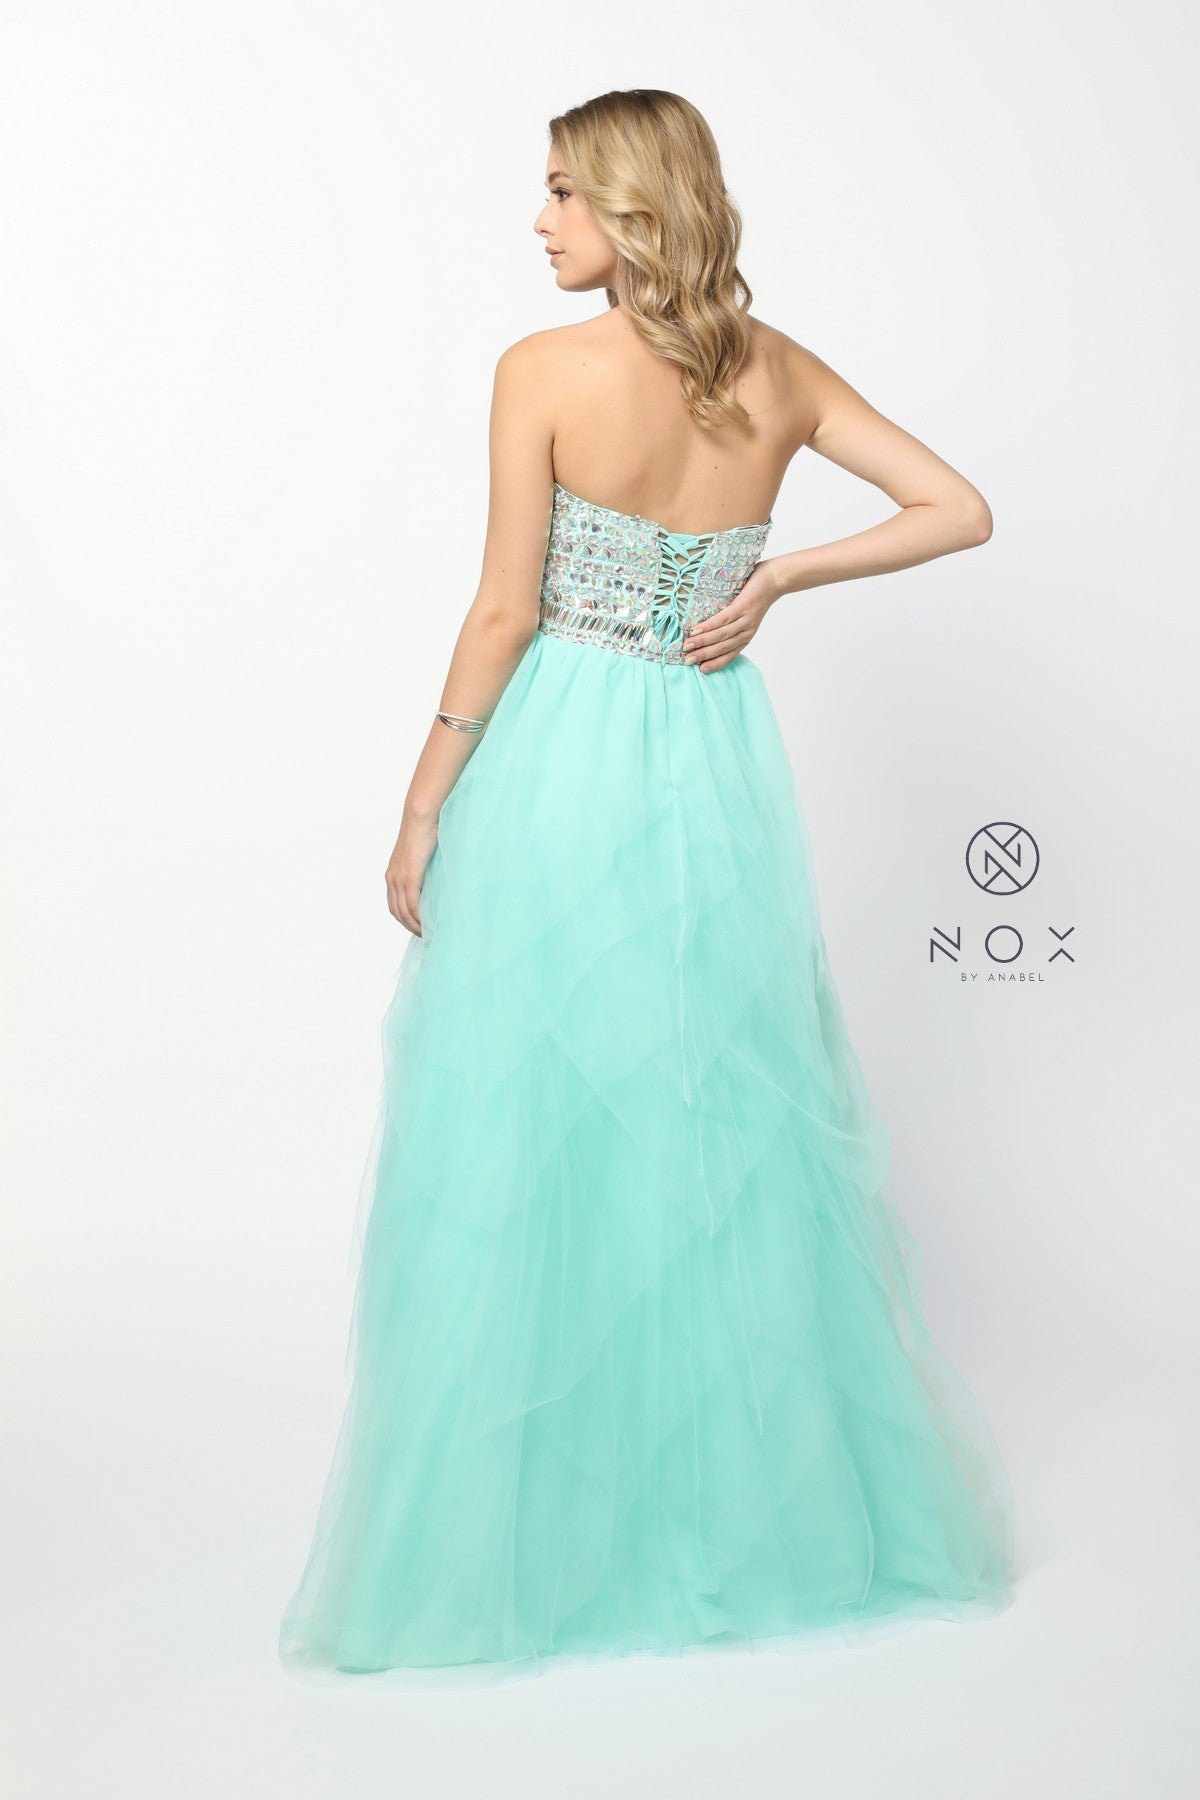 Nox Anabel 2740 Crystal Rhinestone Bodice with lace up corset back. A Line ballgown skirt with layered tulle for a fairy style design! Prom Dress Tulle A line Layered Skirt Formal Ballgown  Available Size & Colors:  Size 2 Lavender  Size 4 Baby Pink  Size 6 Mint Green